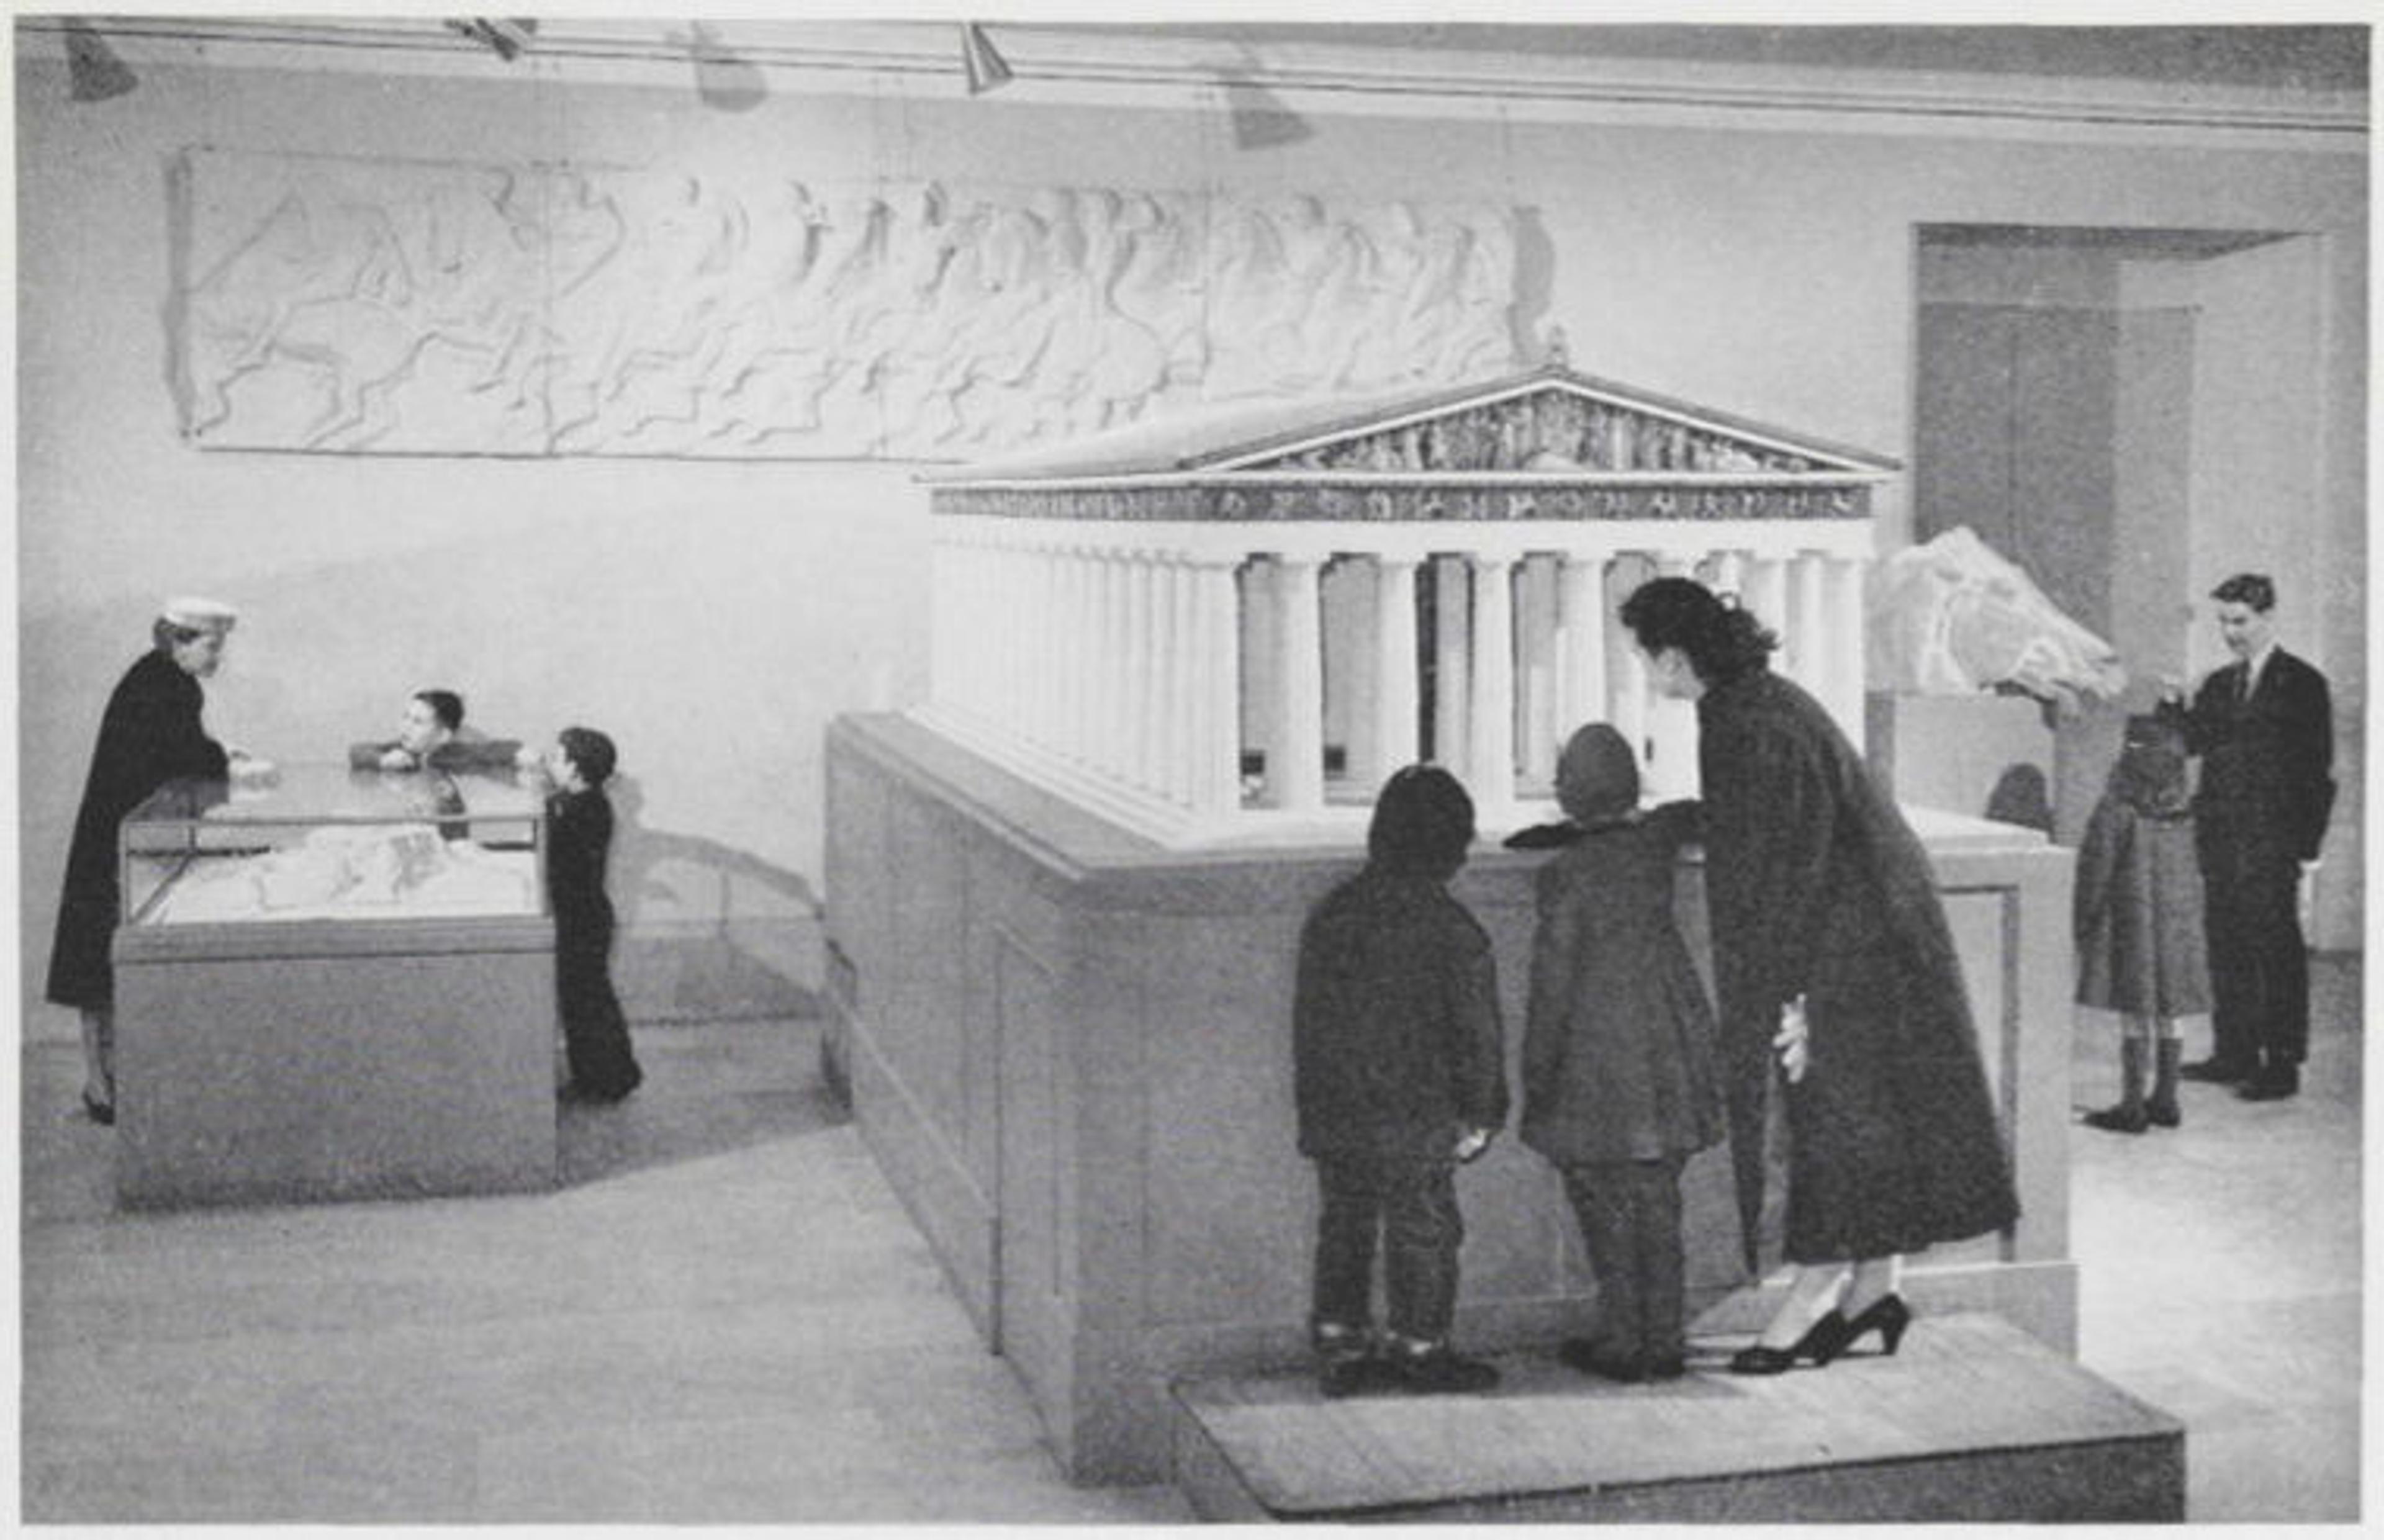 Parthenon from 1958 